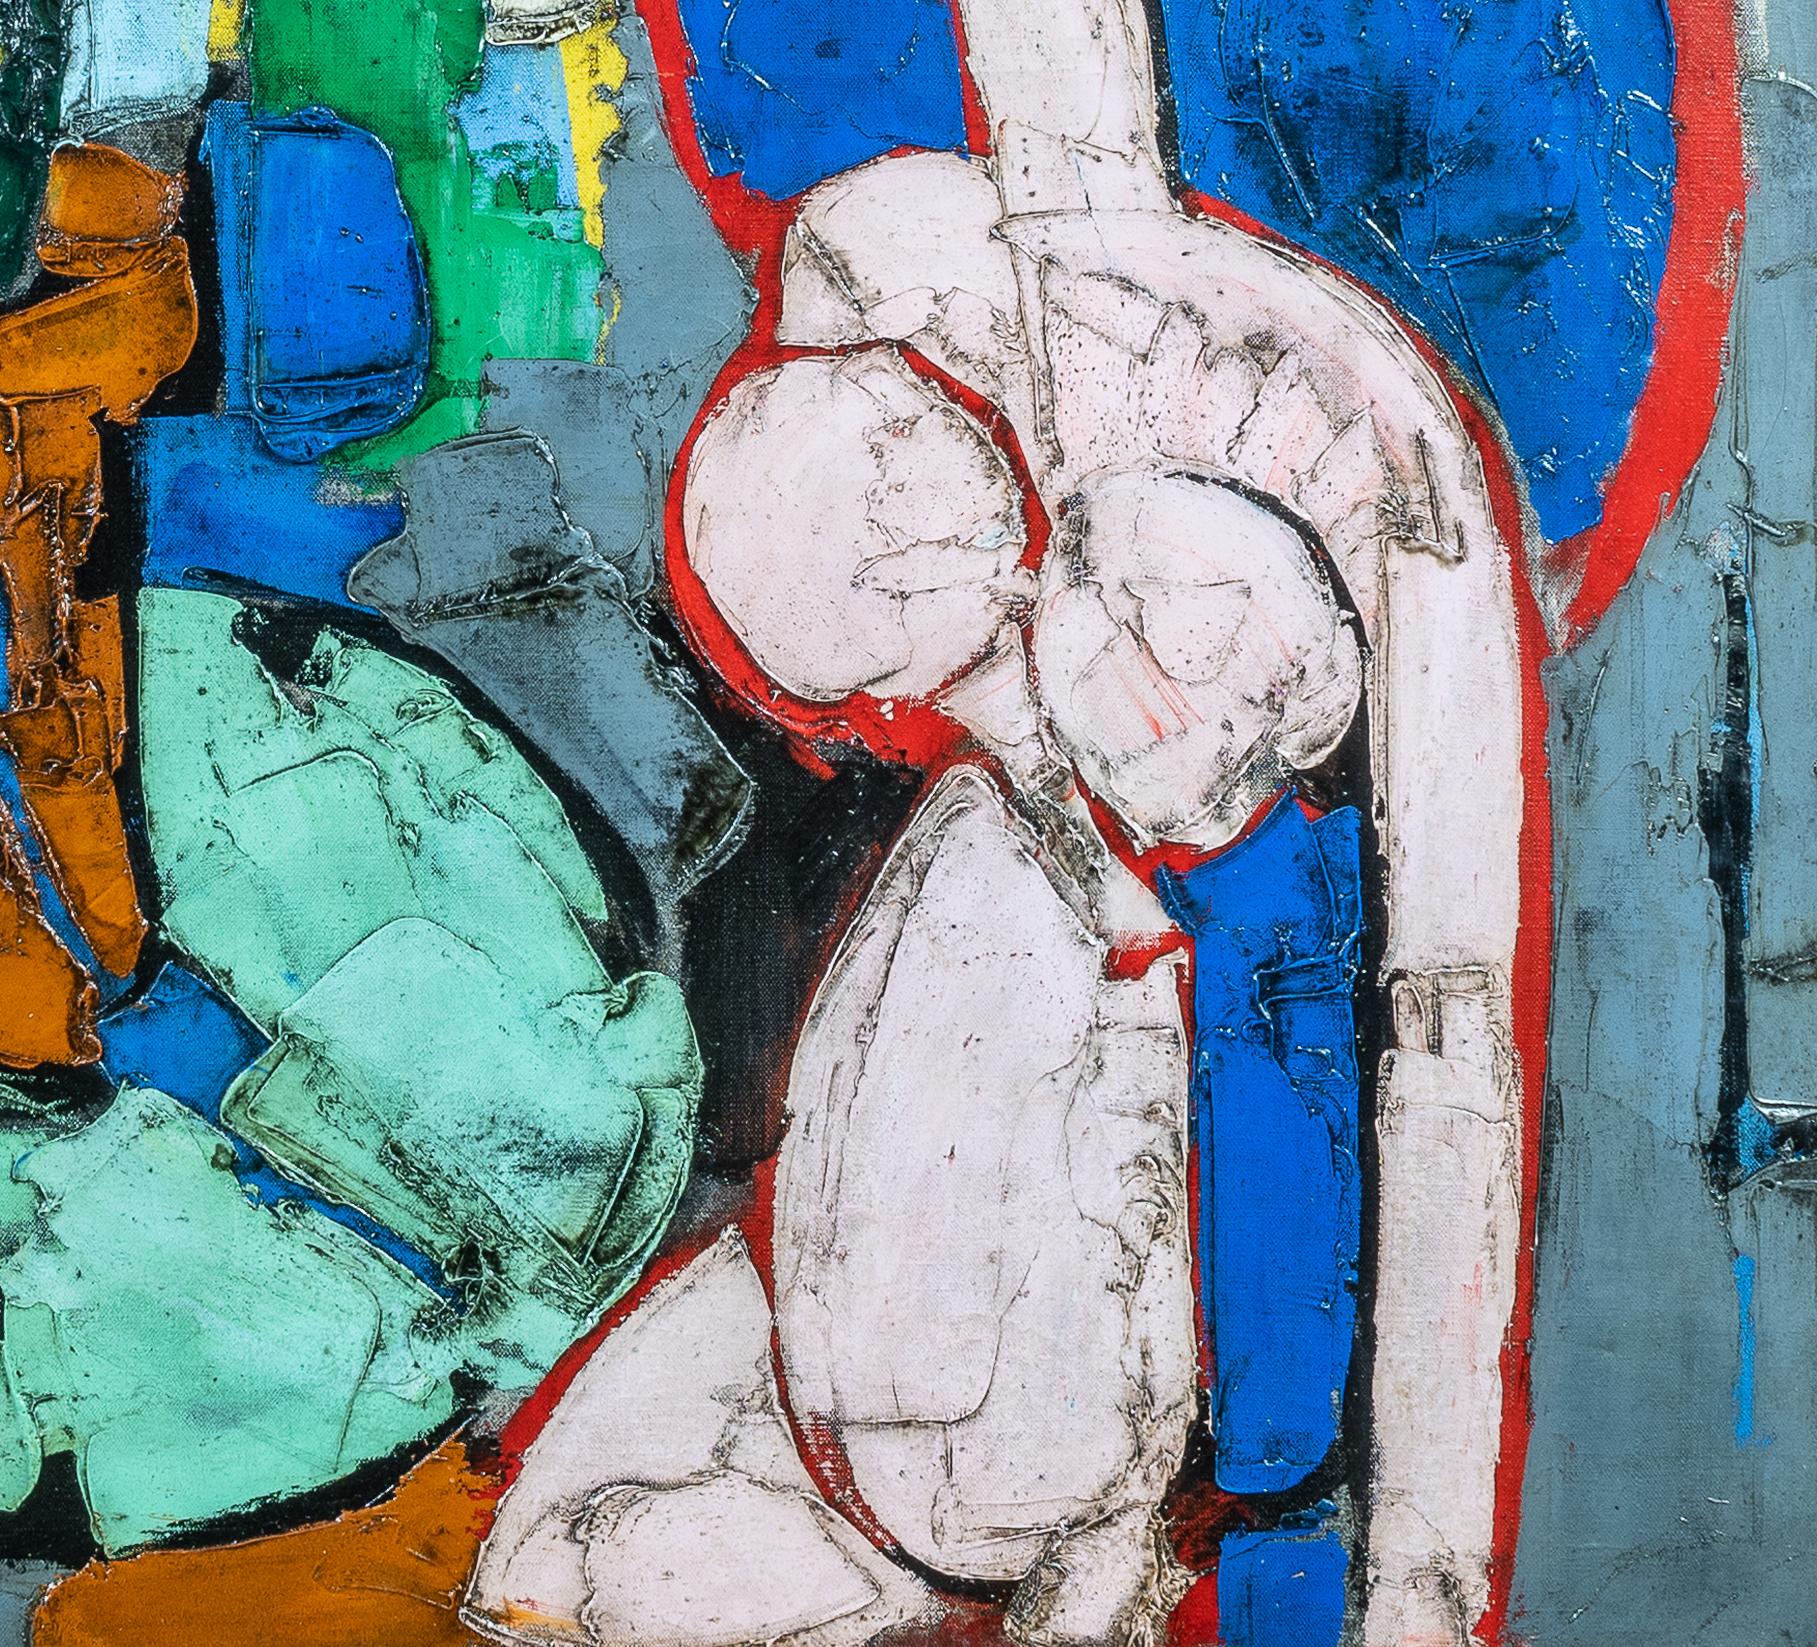 'Abstract Nude' Figurative abstract painting by Claude Venard. Amazing thick impasto which adds fabulous depth and texture. Colourful colour palette and beautiful detailing. 

Beginning his career restoring paintings at Le Louvre, Venard learnt his